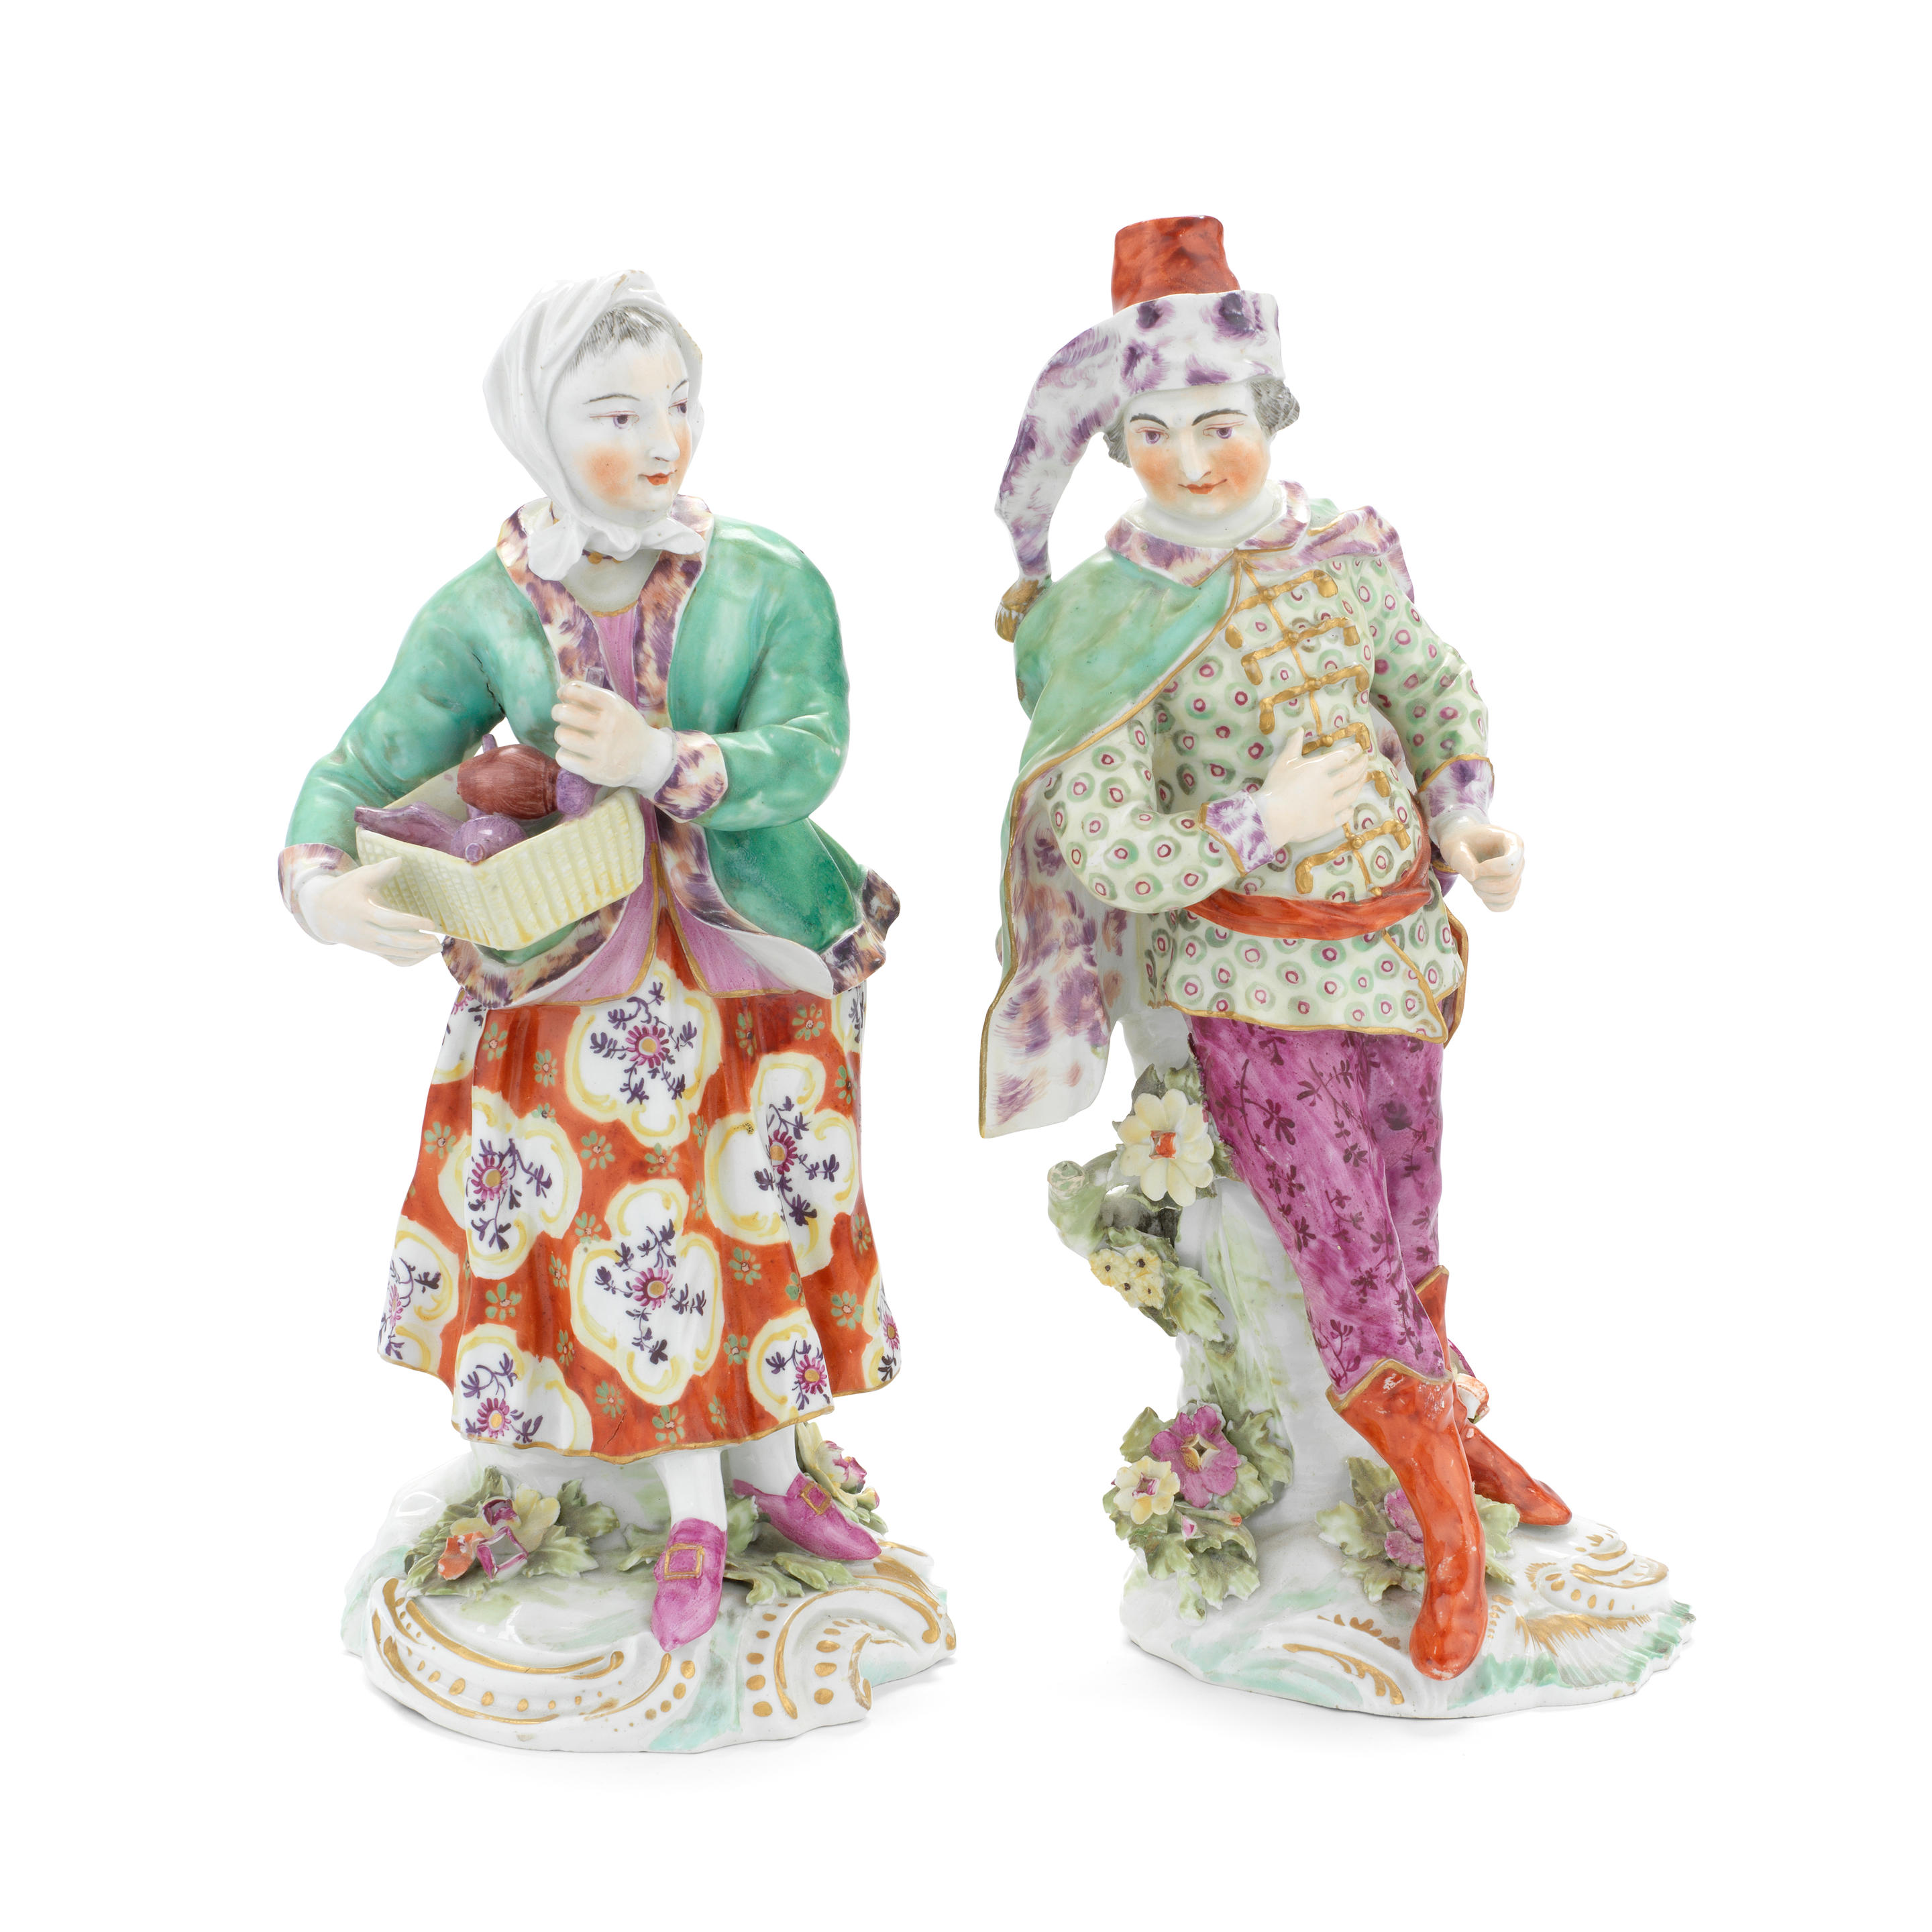 A pair of Derby theatrical figures, circa 1765